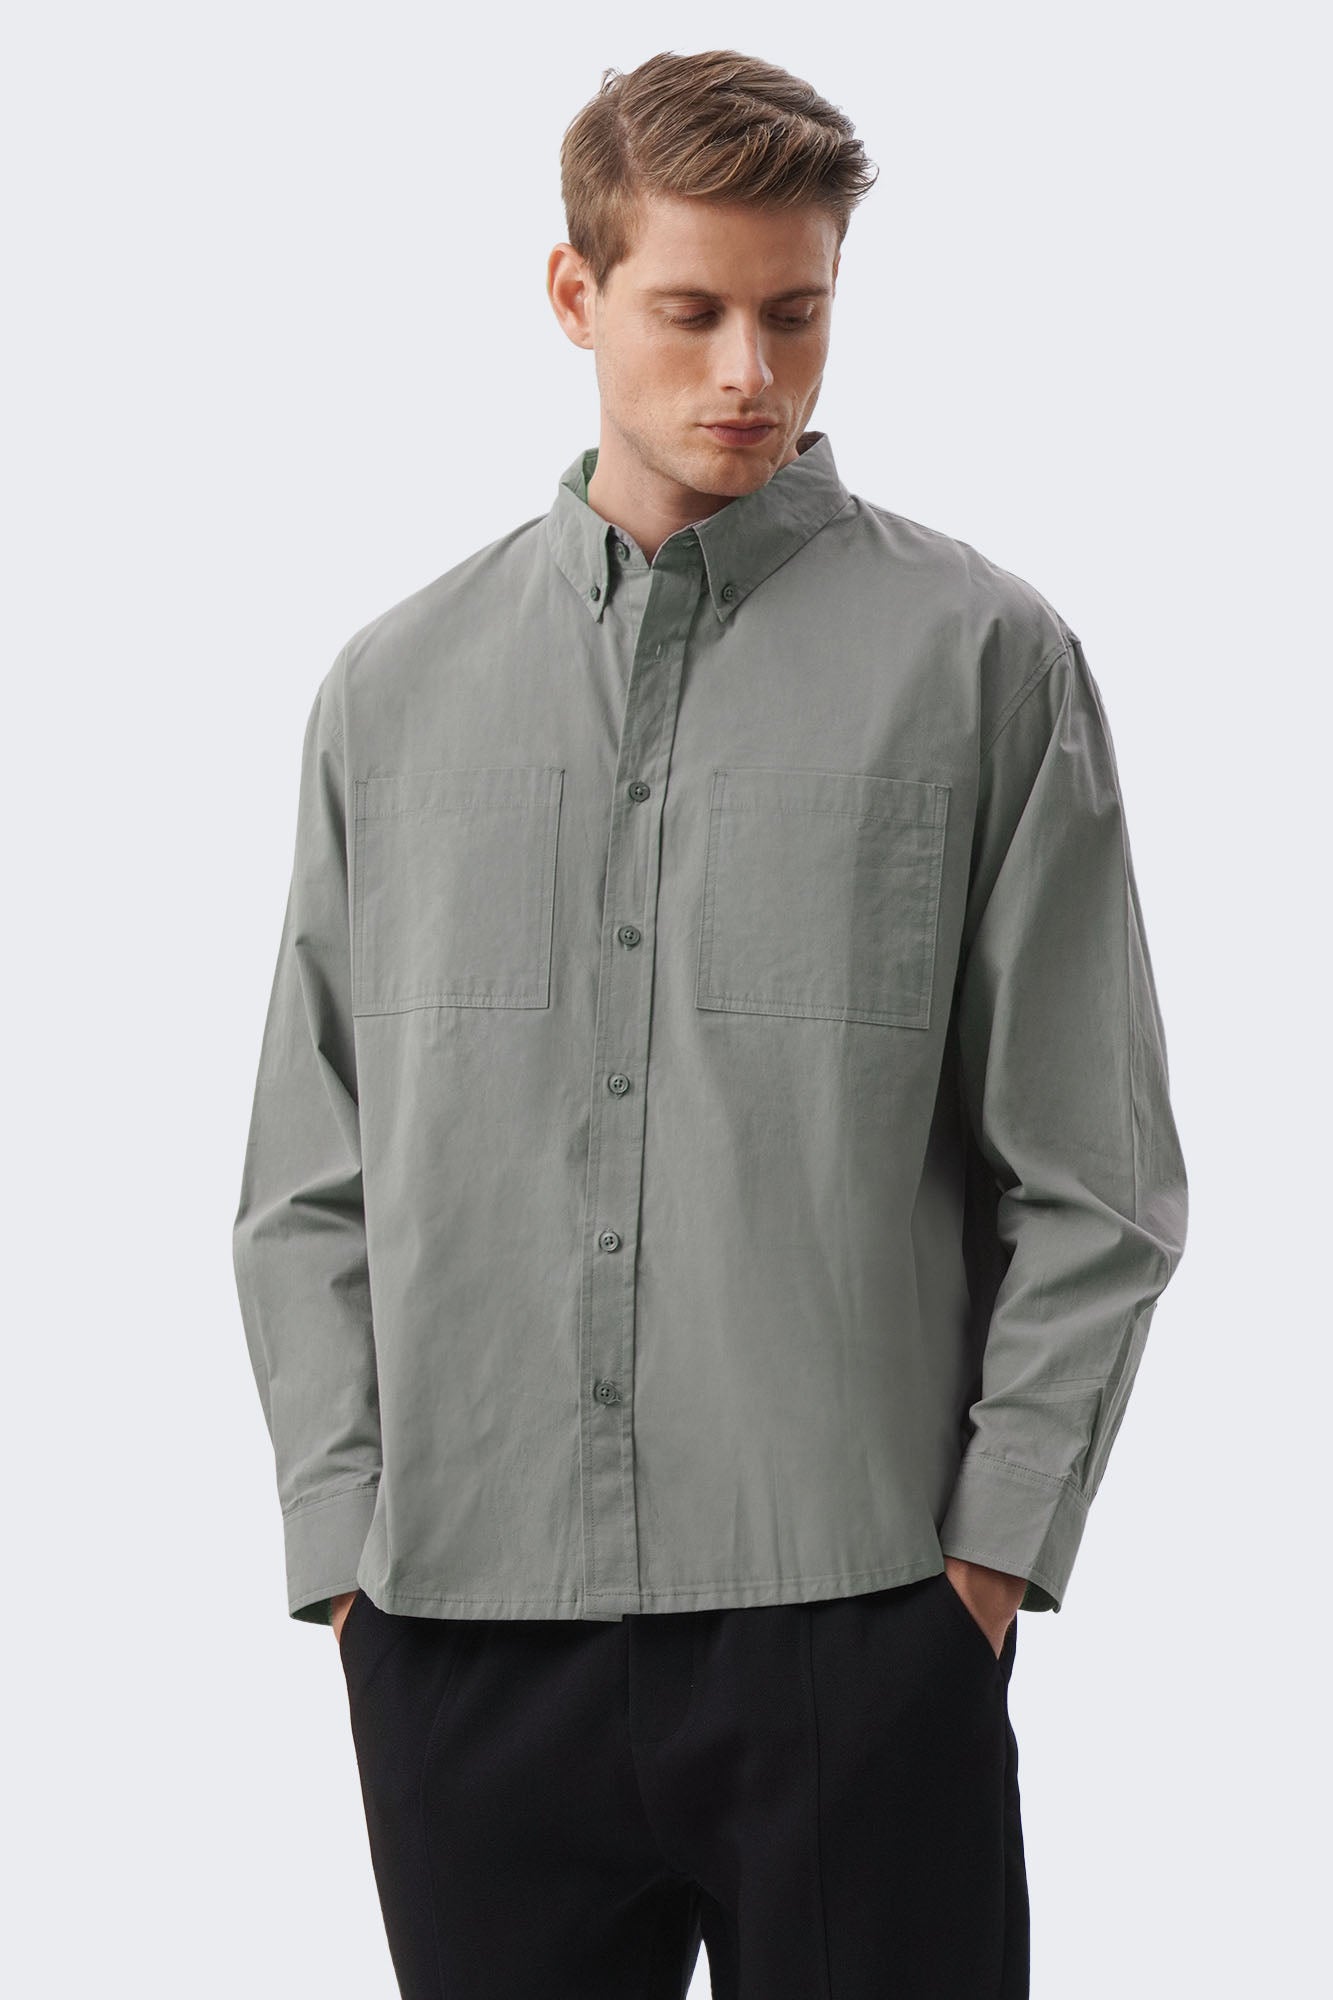 Men's Button Down Shirt with Chest Pockets